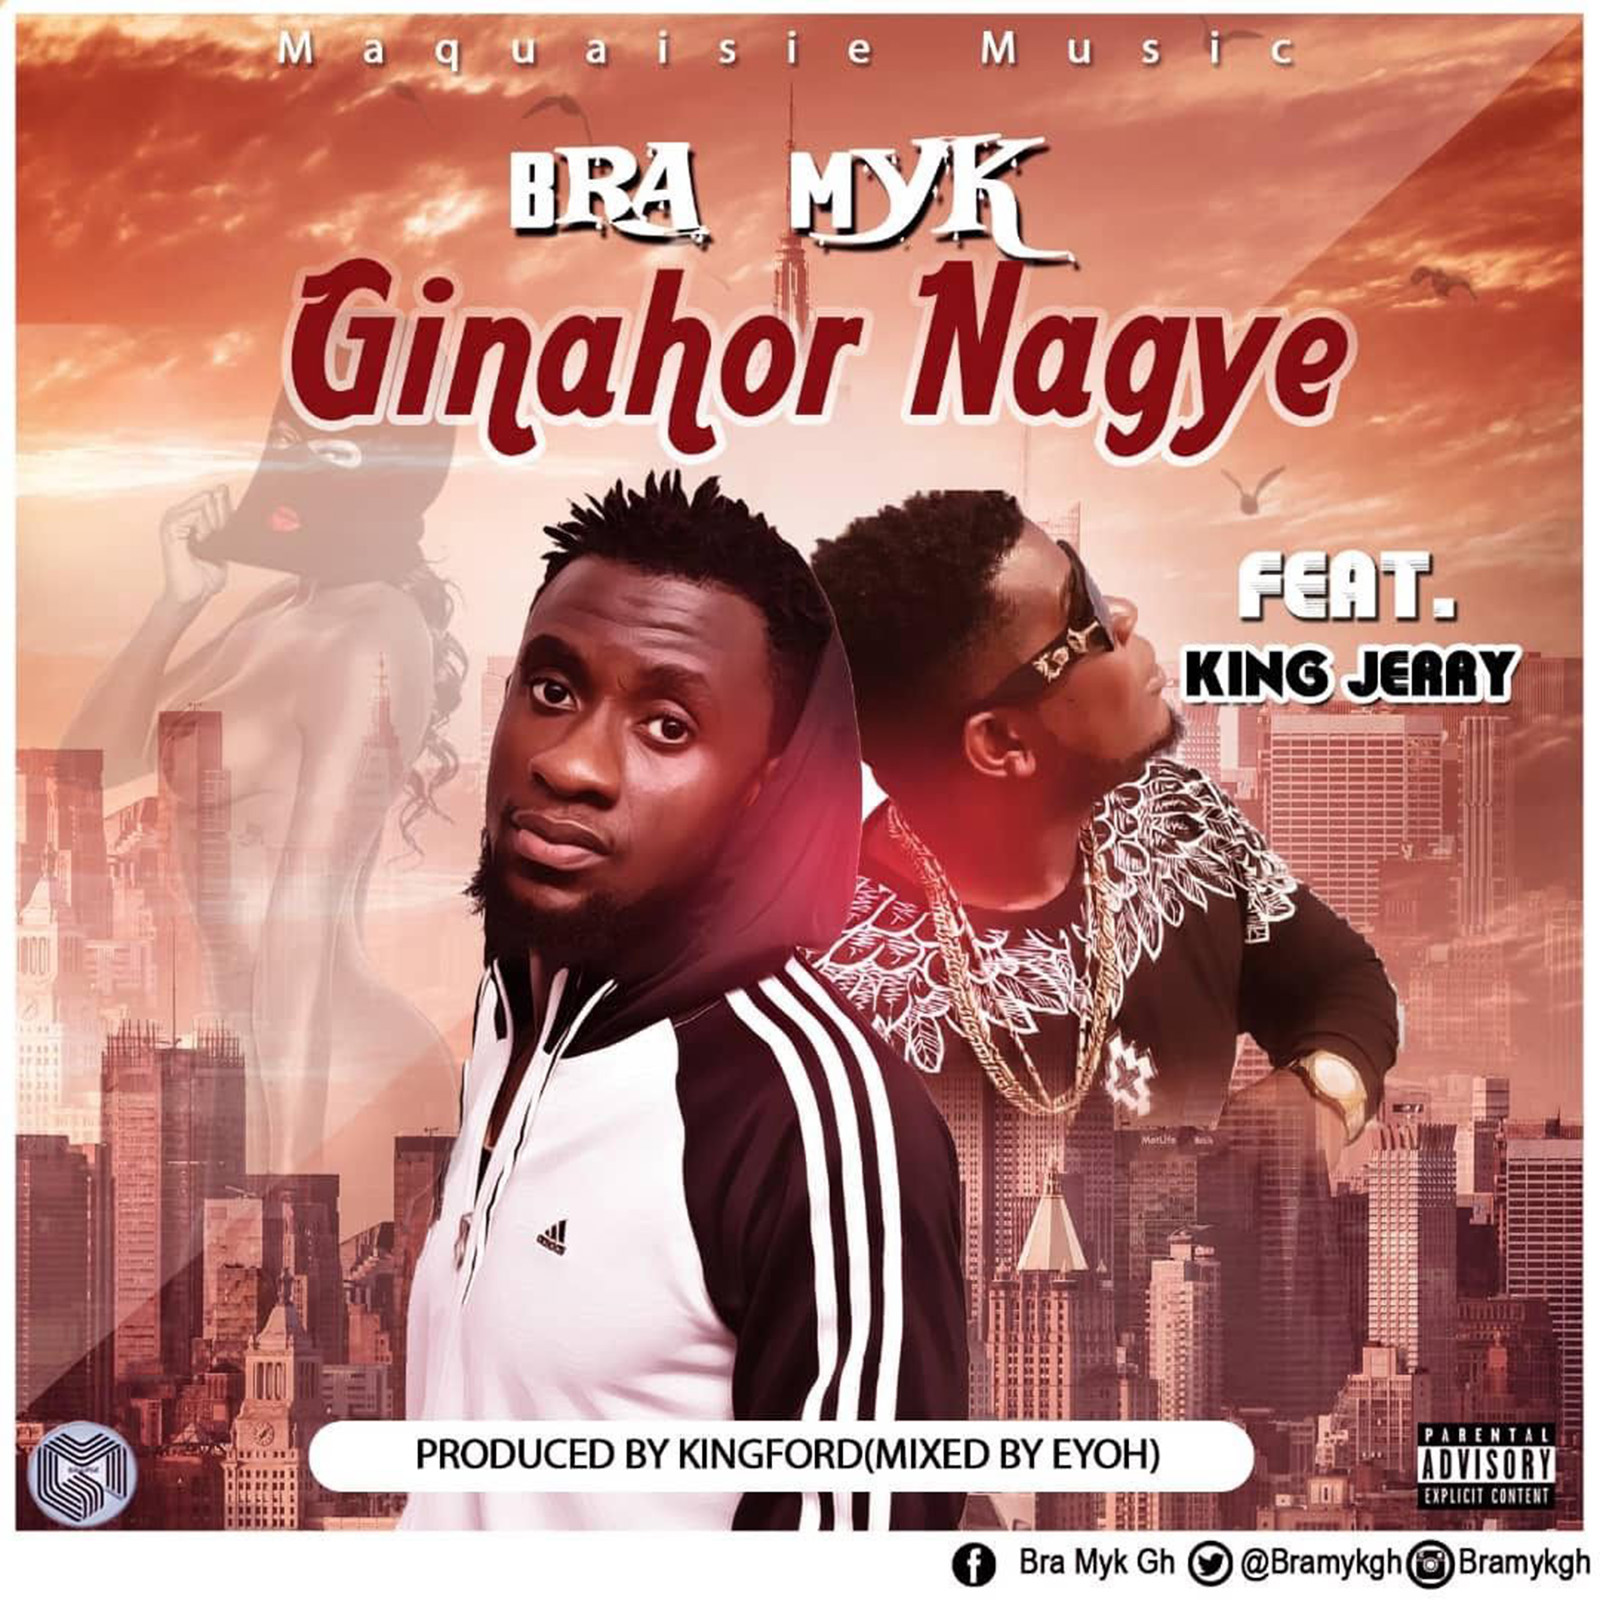 Ginahor Nagye by Bra Myk feat. King Jerry